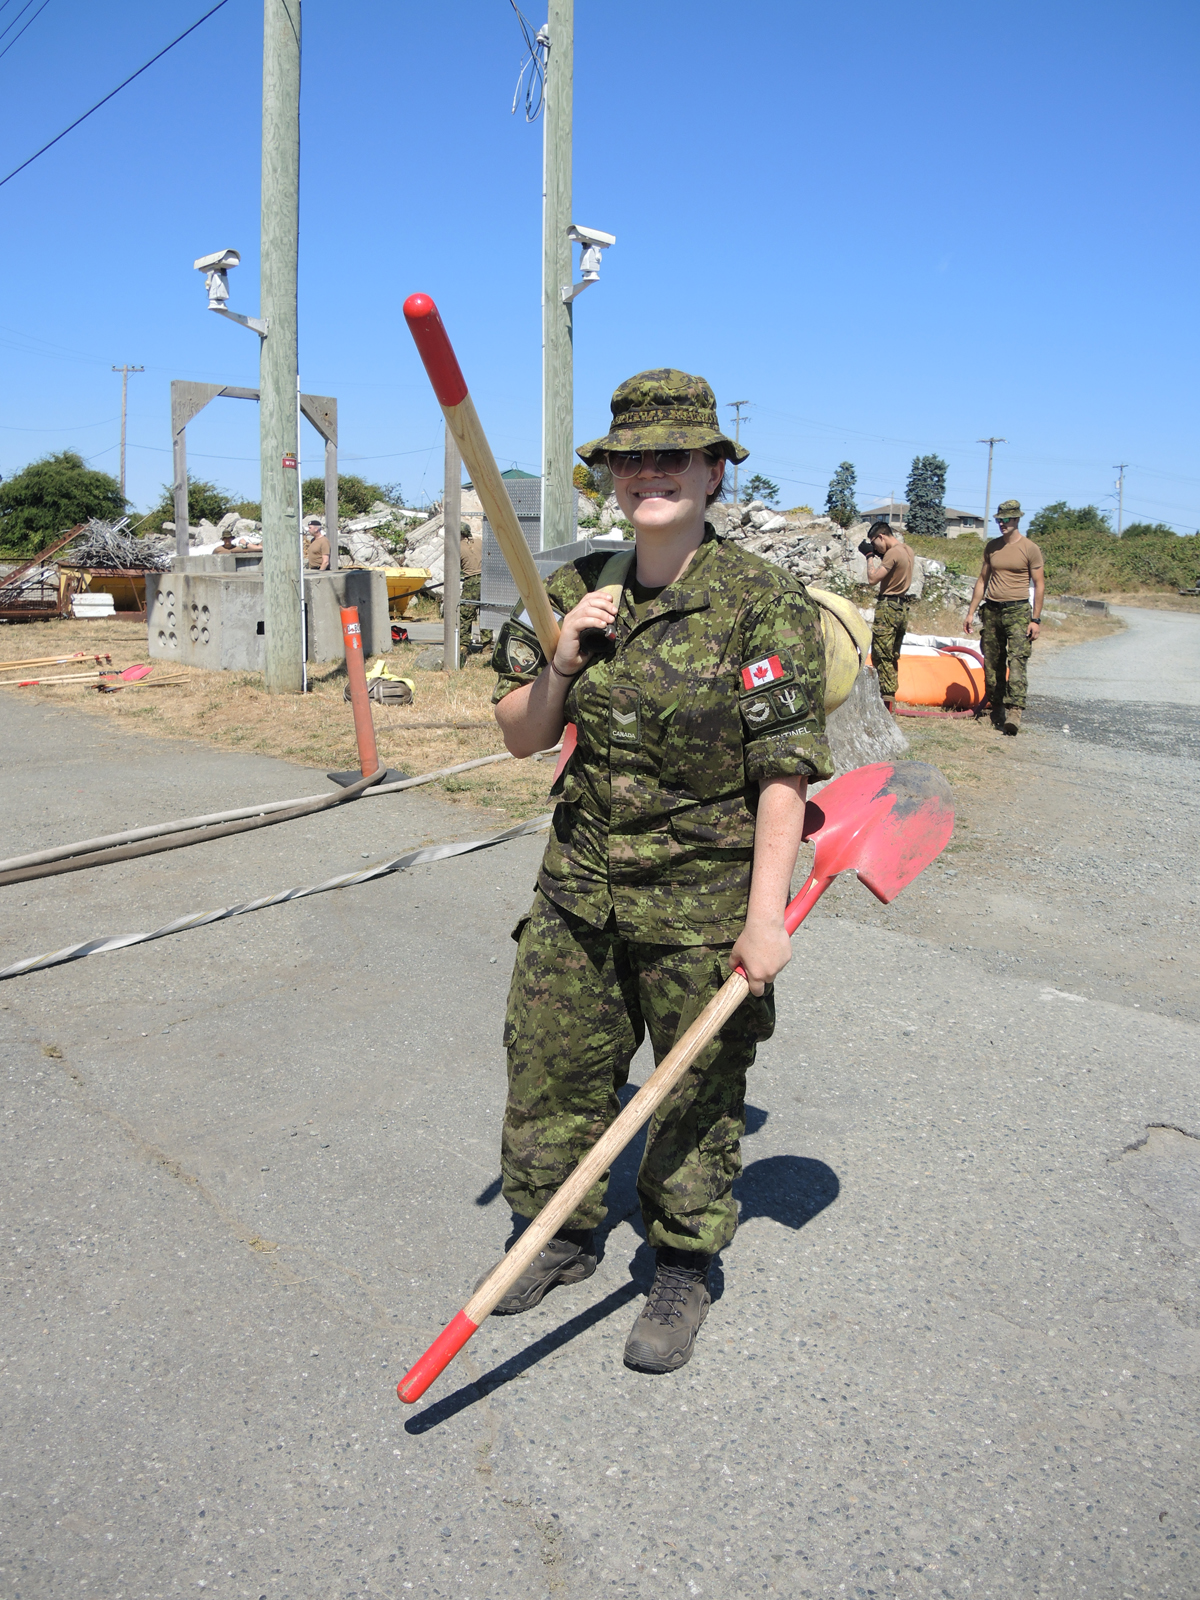 Army Reservist Corporal Kathleen Parker of the British Columbia Regiment (Duke of Connaught's Own) carries shovels used for wildfire fighting during OP Lentus Training, July 21 at CFB Esquimalt's Urban Search and Rescue Training Centre. Members of the 39 Canadian Brigade Group will deploy to British Columbia's central interior this month to fight wildfires. Photos: Peter Mallett/Lookout Newspaper